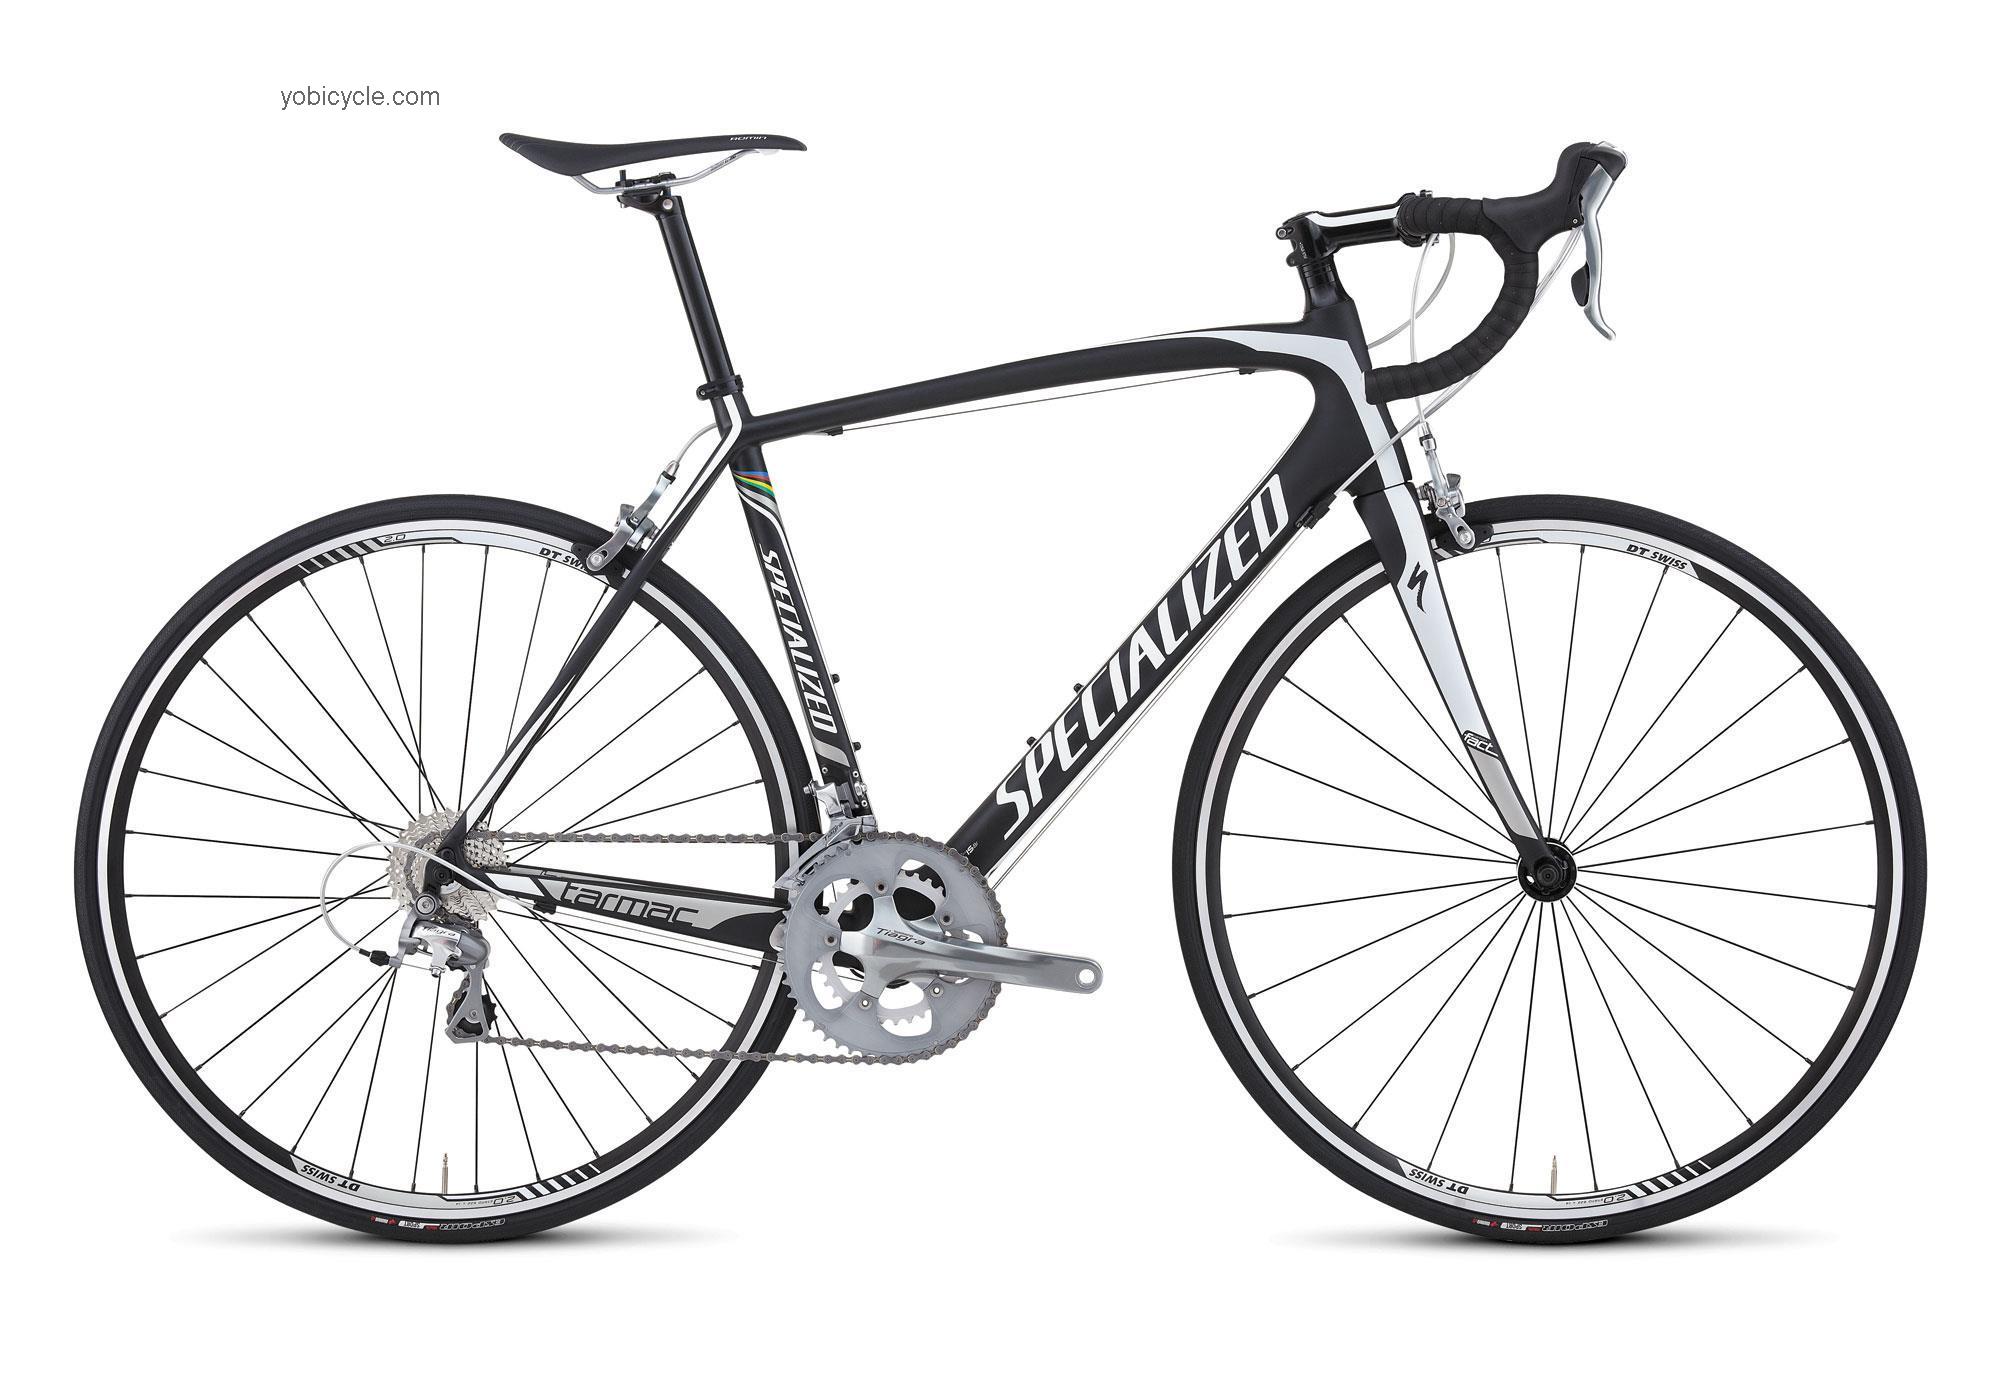 Specialized Tarmac Compact 2012 comparison online with competitors